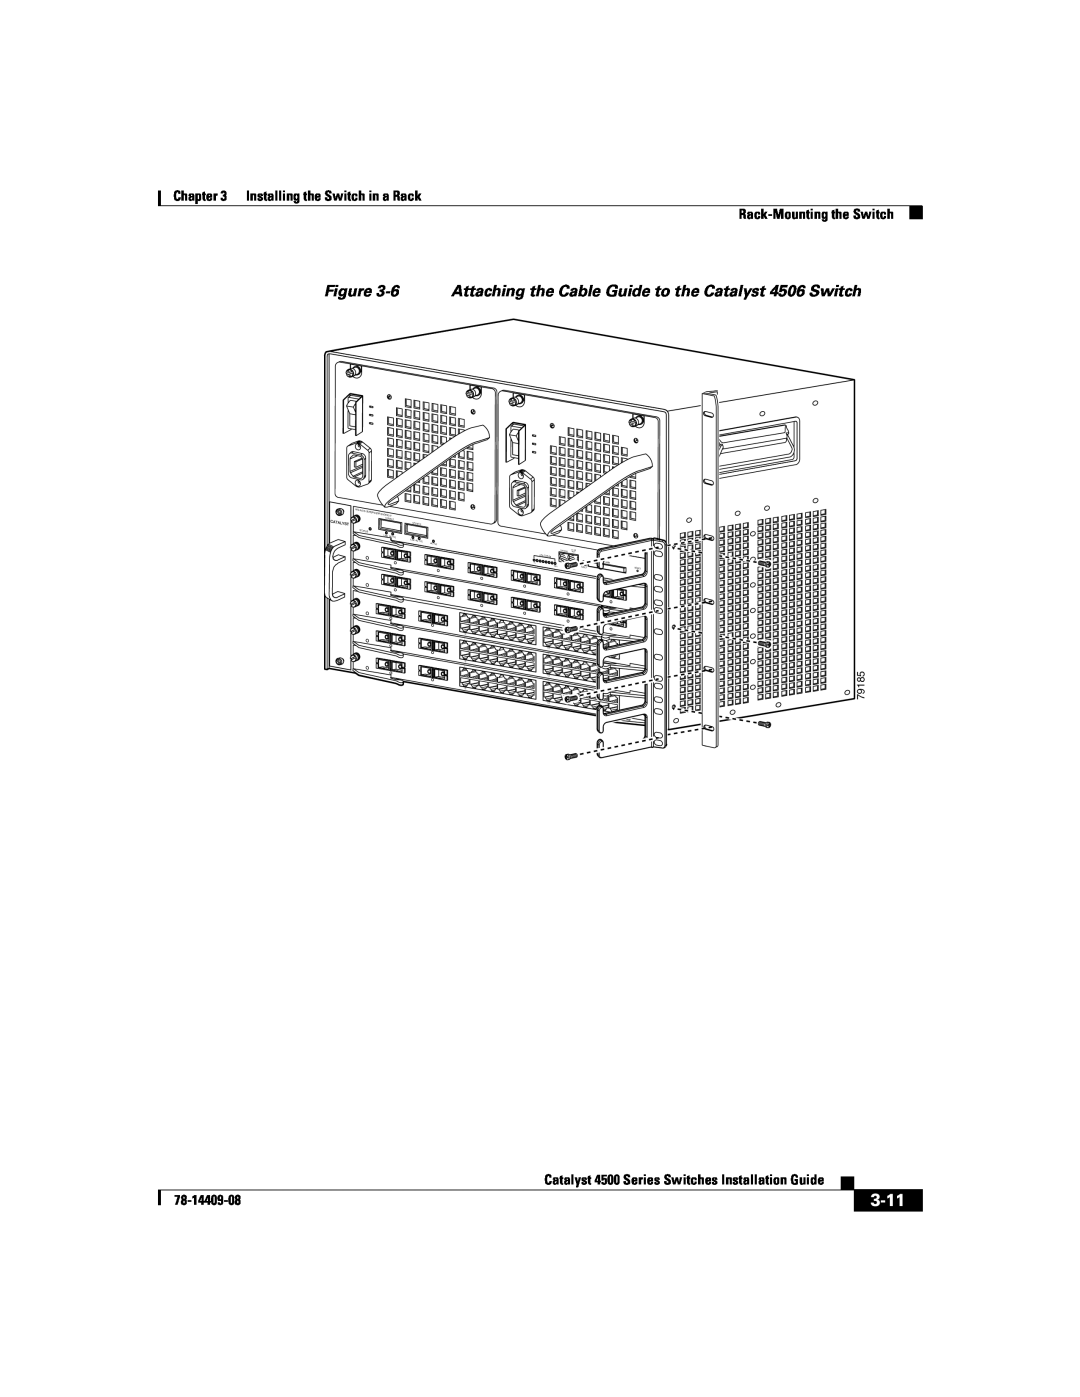 Cisco Systems WSC4500XF16SFP manual 3-11, 6 Attaching the Cable Guide to the Catalyst 4506 Switch, 78-14409-08, 79185 